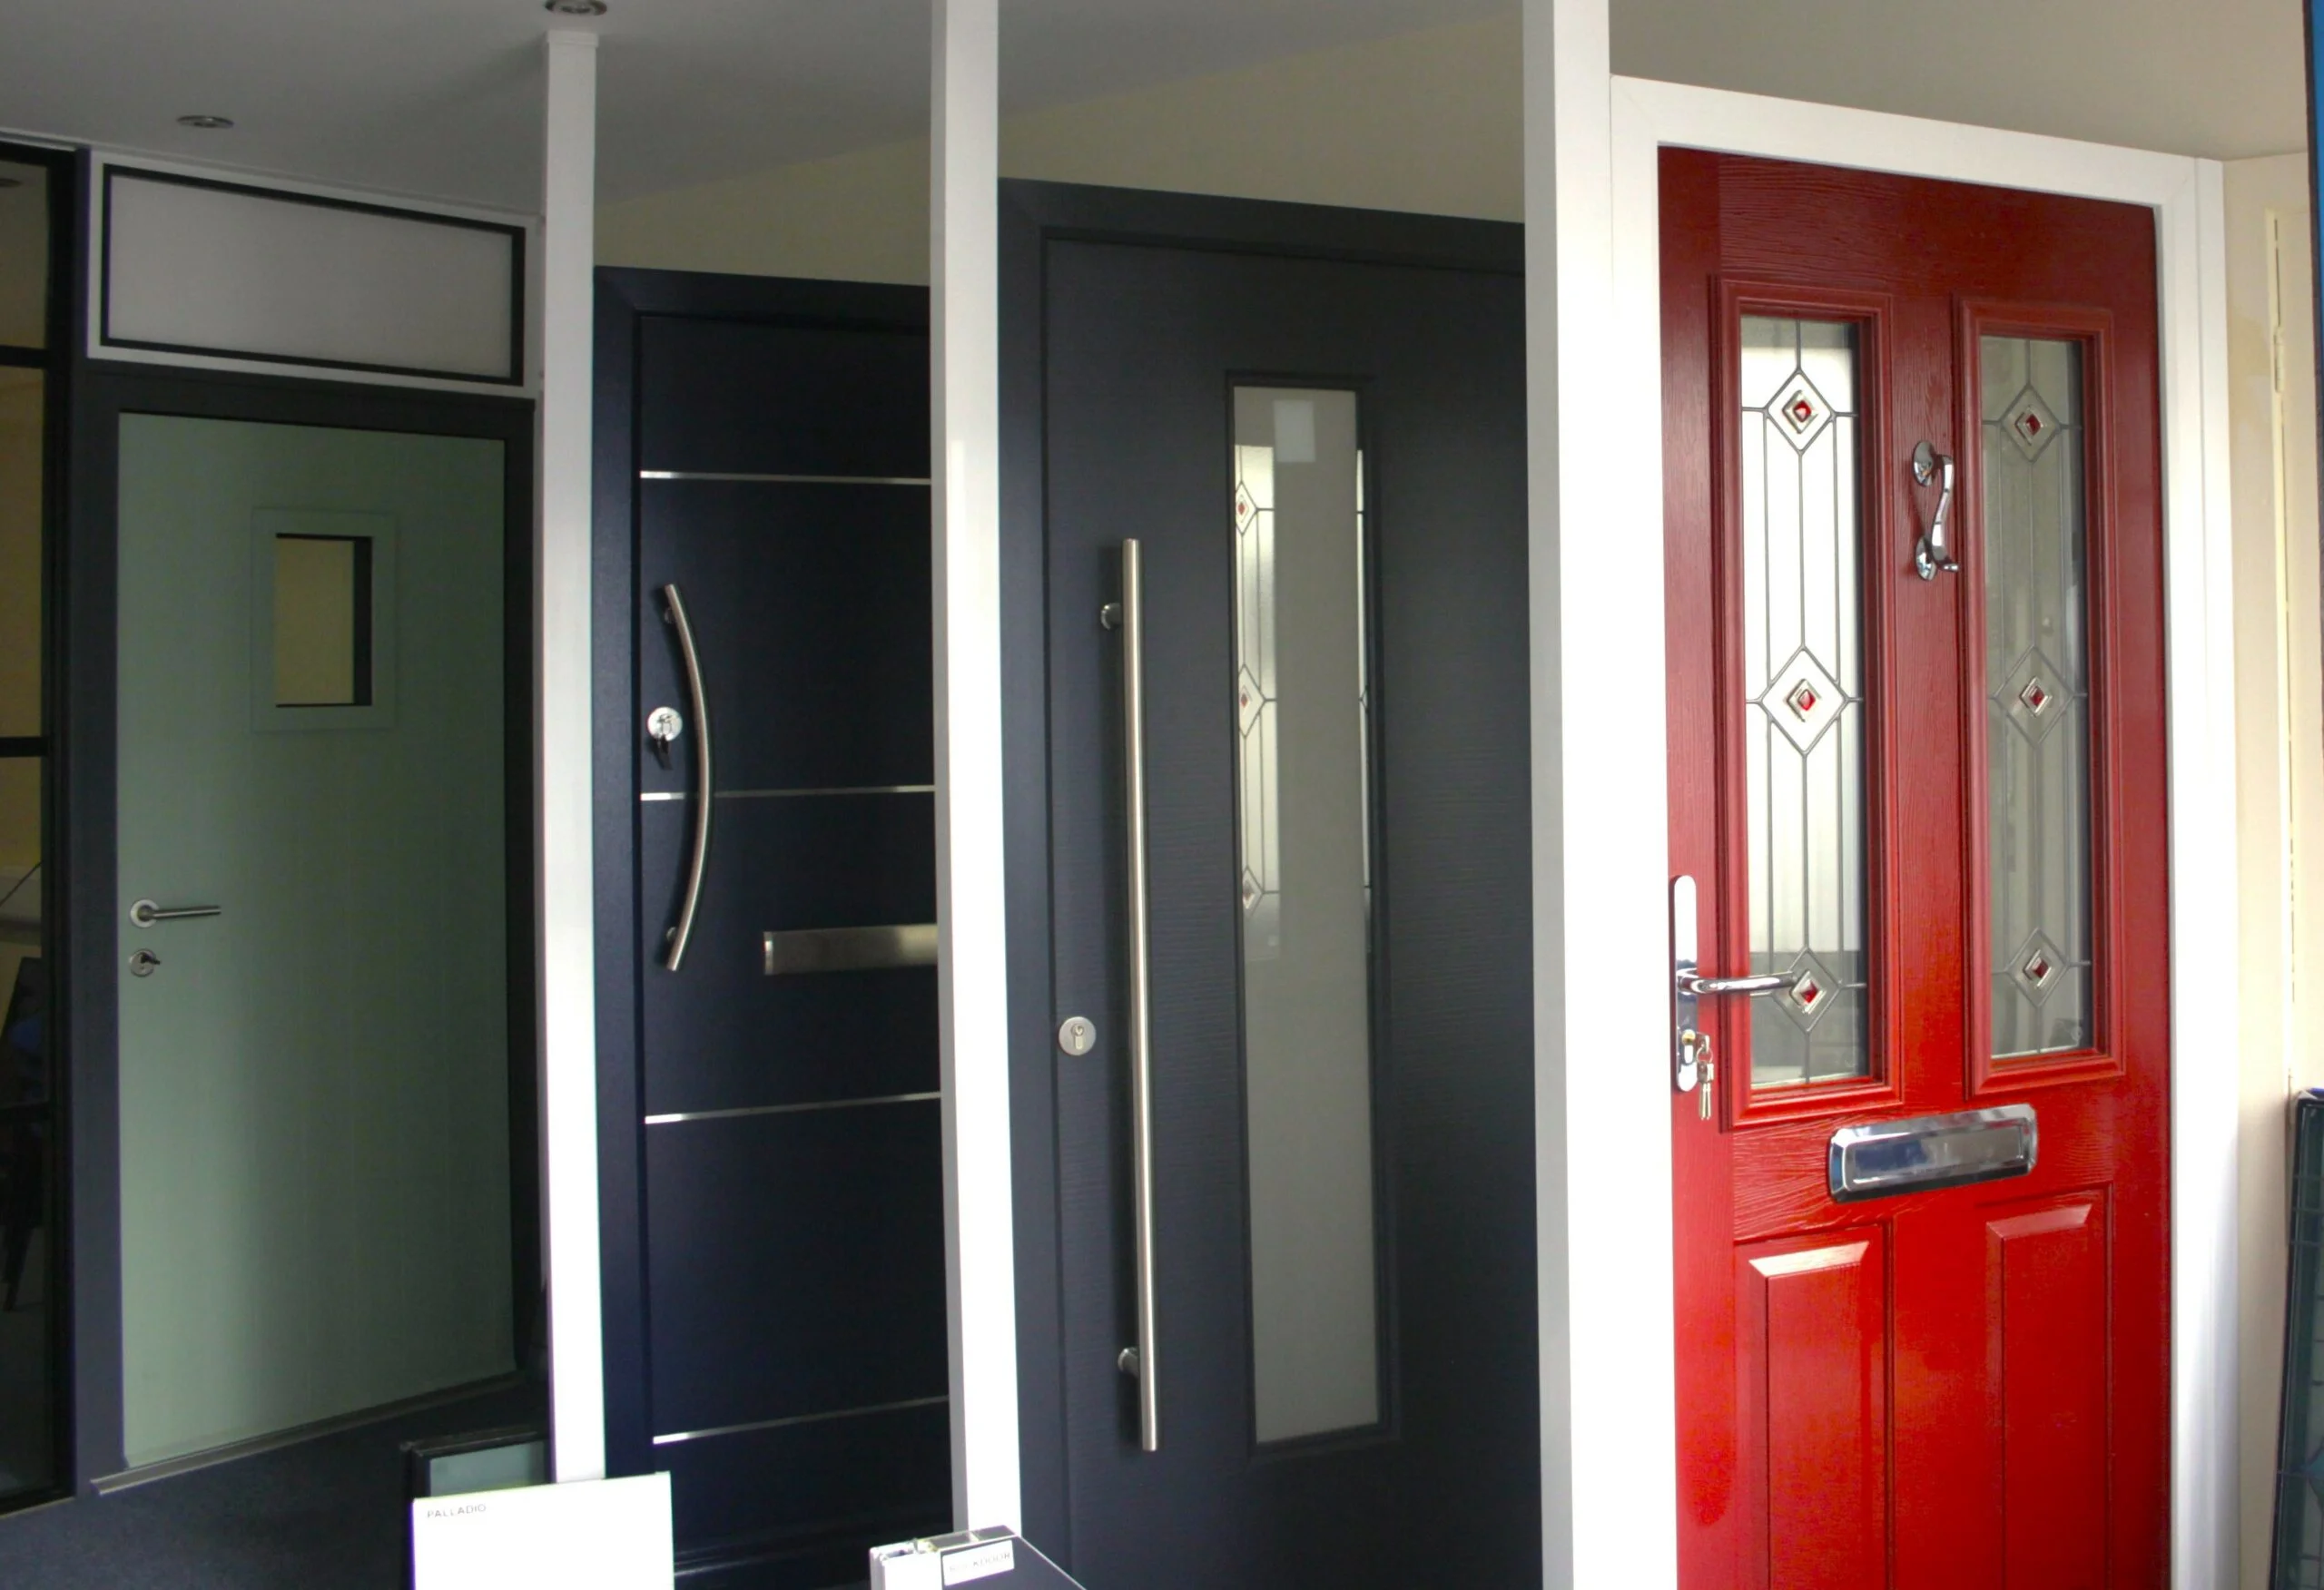 P & K Lacey's showroom with composite and aluminium doors on display.